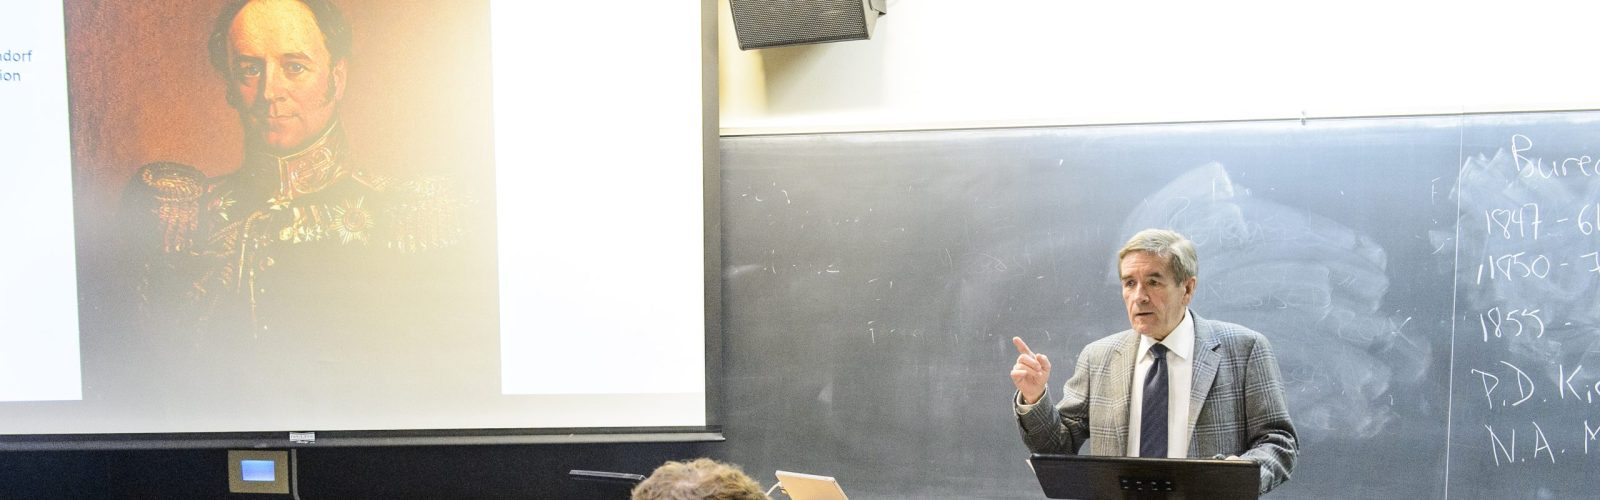 David McDonald, professor of history at the University of Wisconsin-Madison, teaches during a History 418: History of Russia course in the Mosse Humanities Building on Feb. 28, 2018. McDonald is a recipient of a 2018 Distinguished Teaching Award. (Photo by Bryce Richter / UW-Madison)